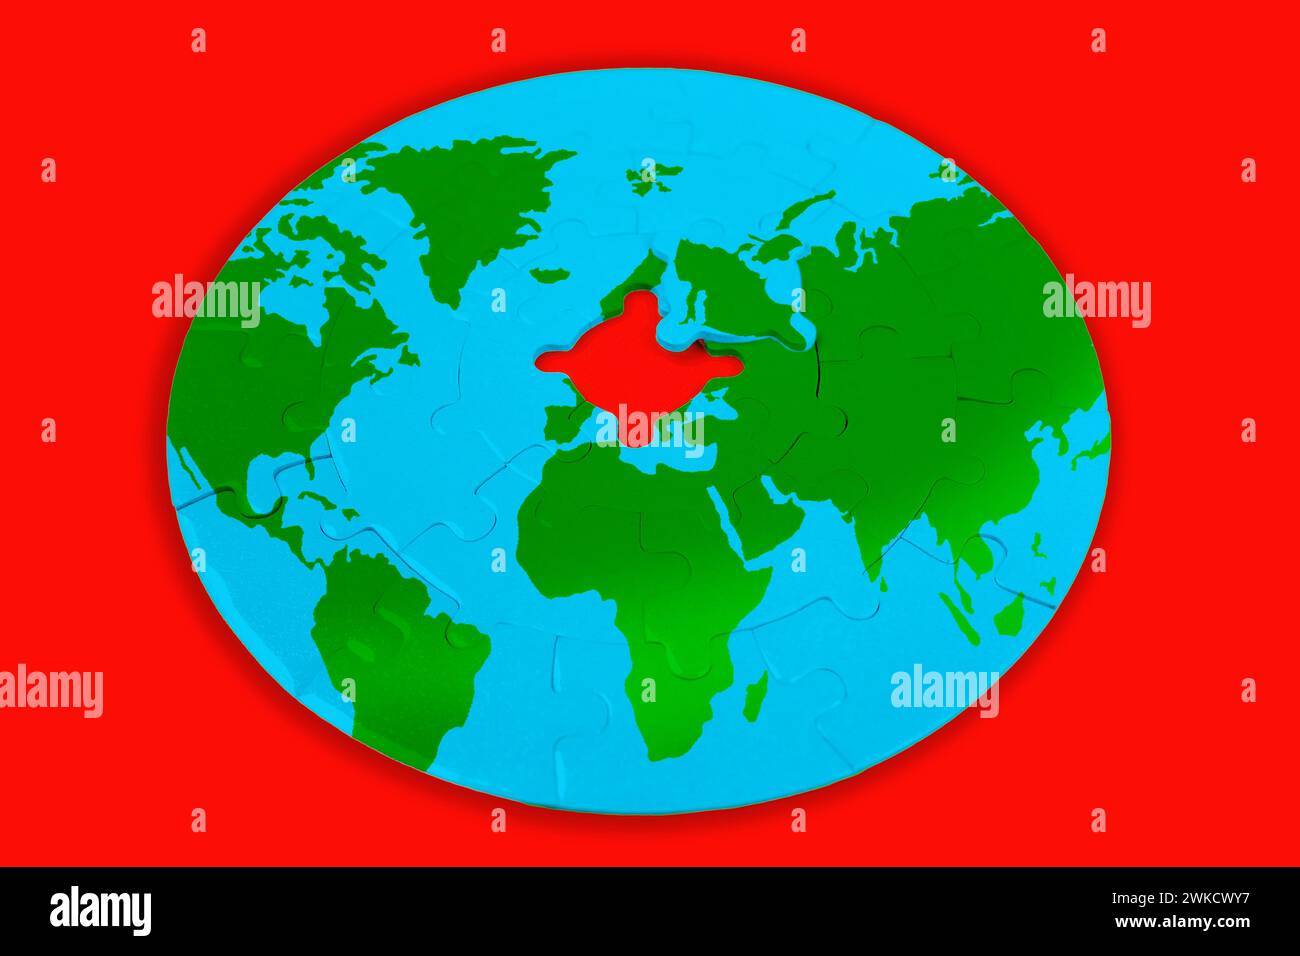 Round jigsaw puzzle depicts a world map with green continents and blue oceans on a red background, with the missing center piece. Global unity and coo Stock Photo